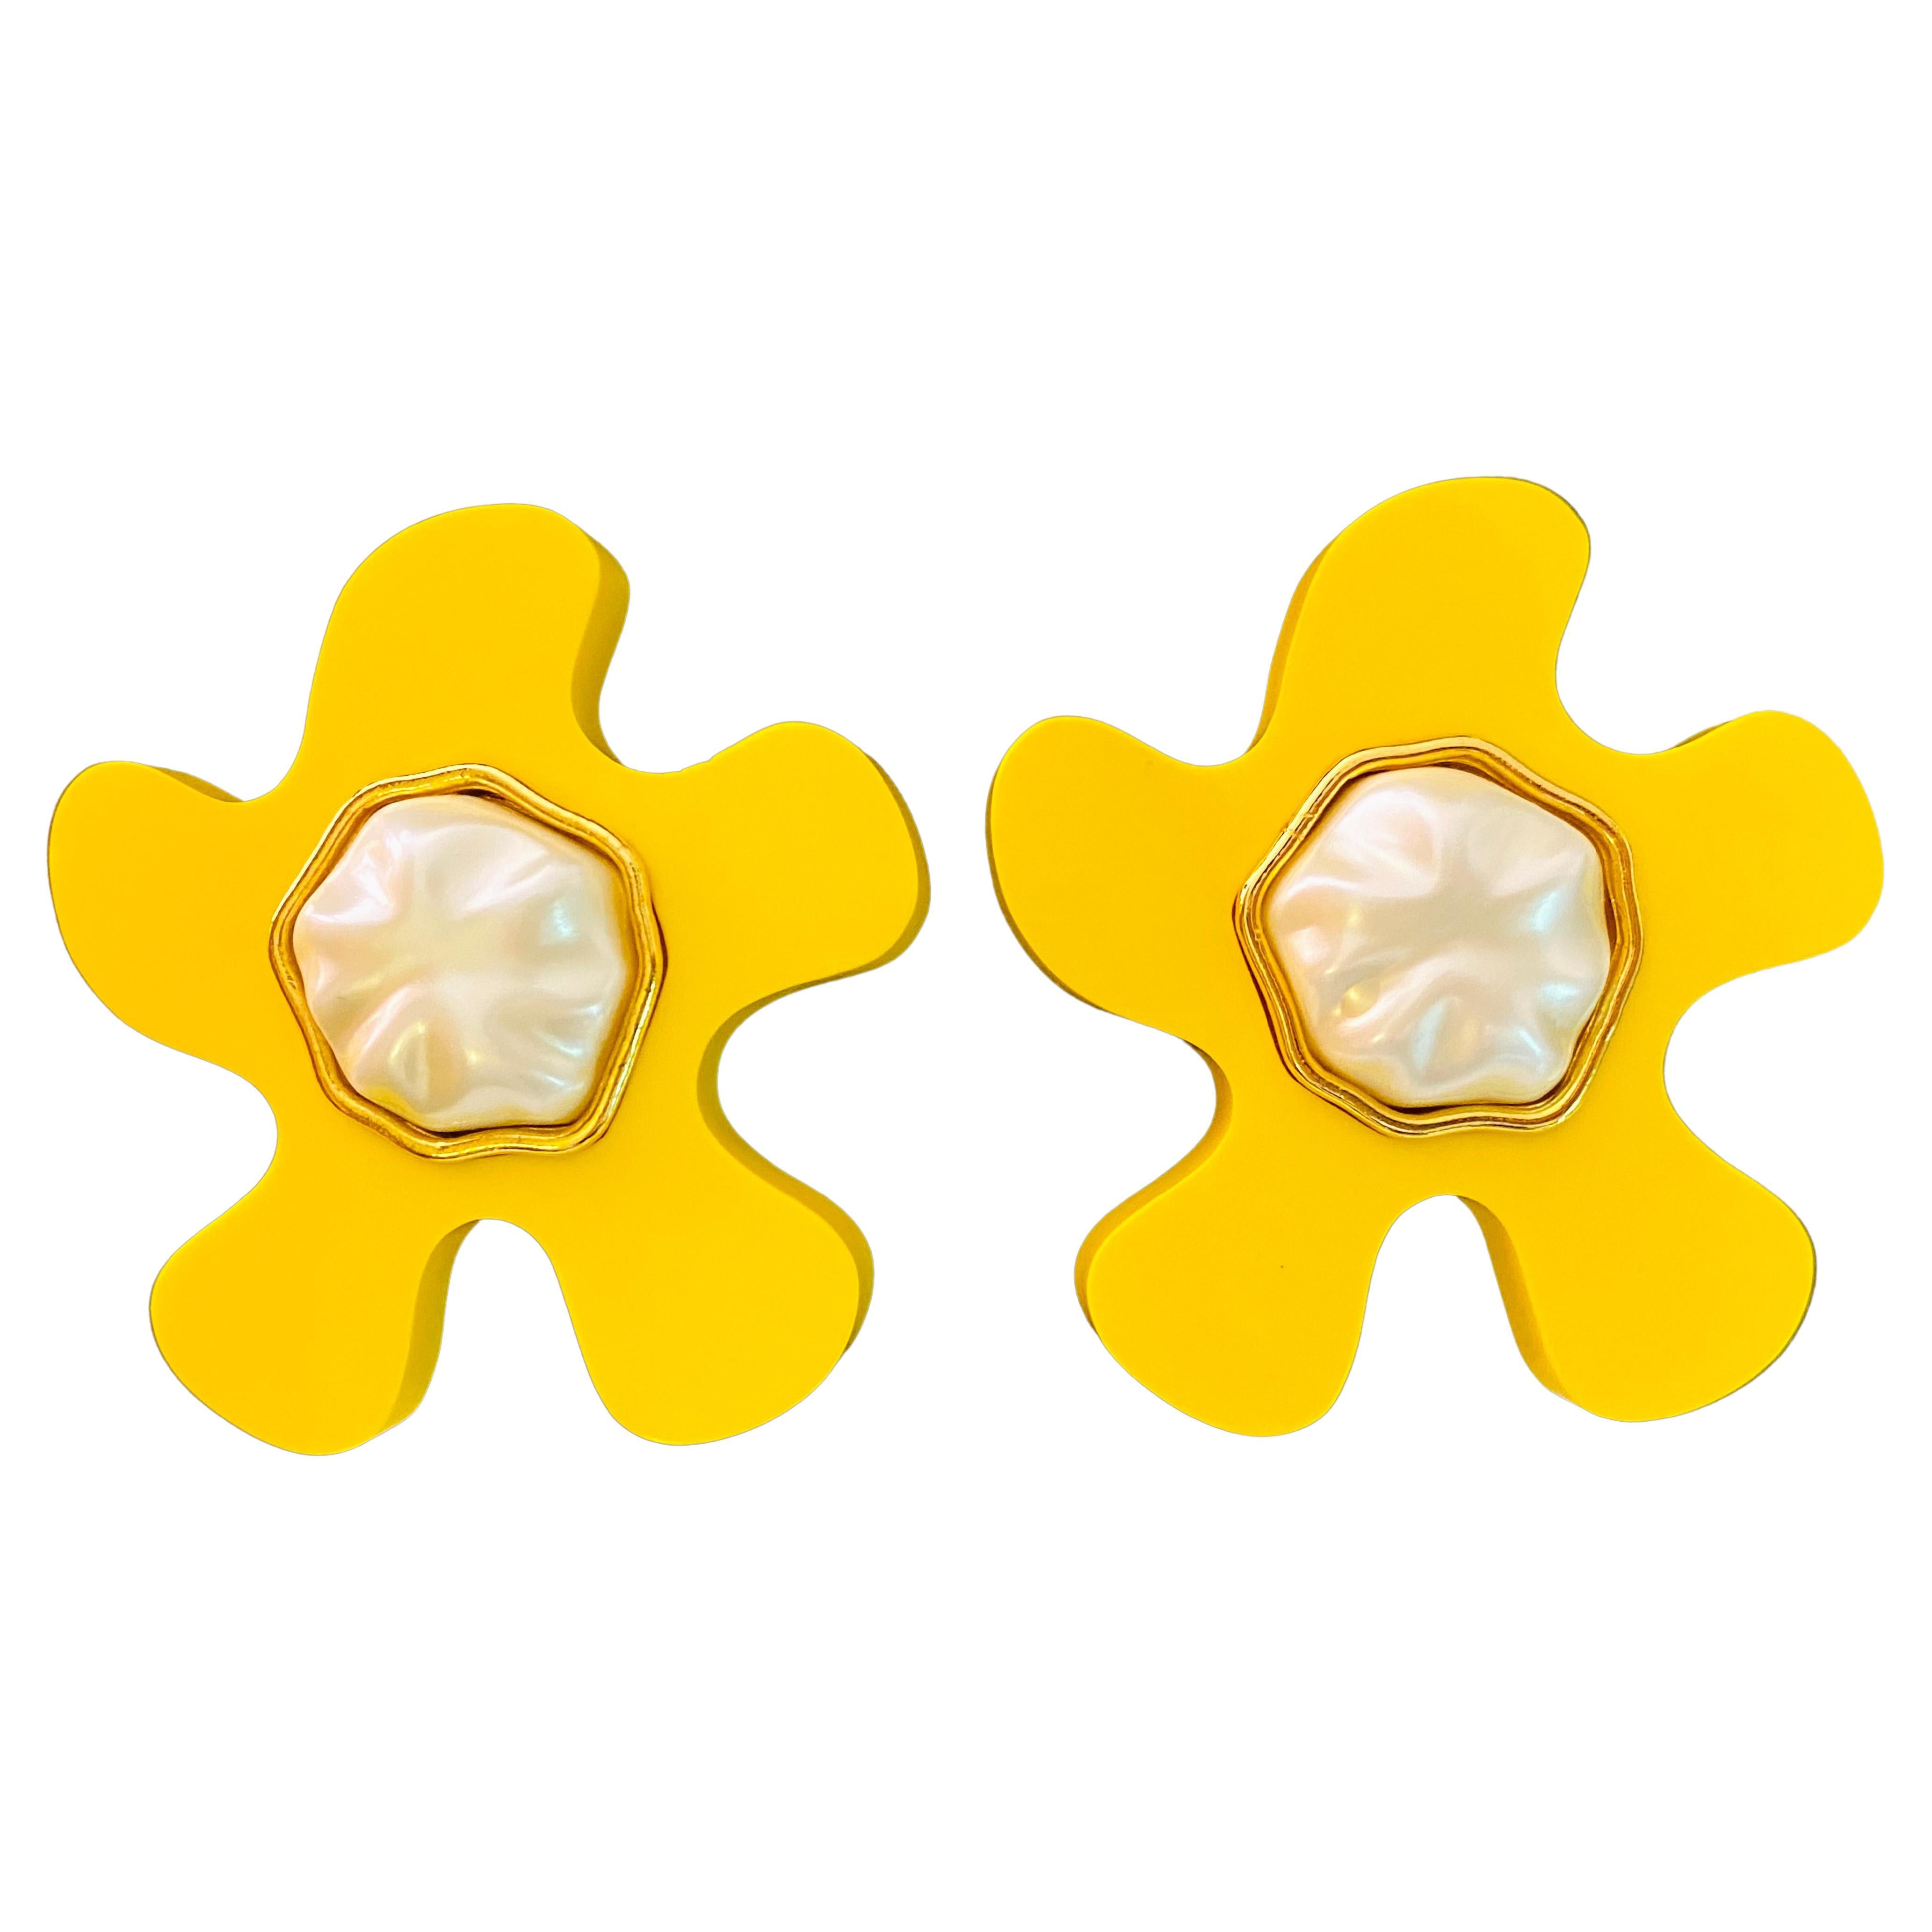 Rare Chanel oversized 1991 yellow clip on earrings 